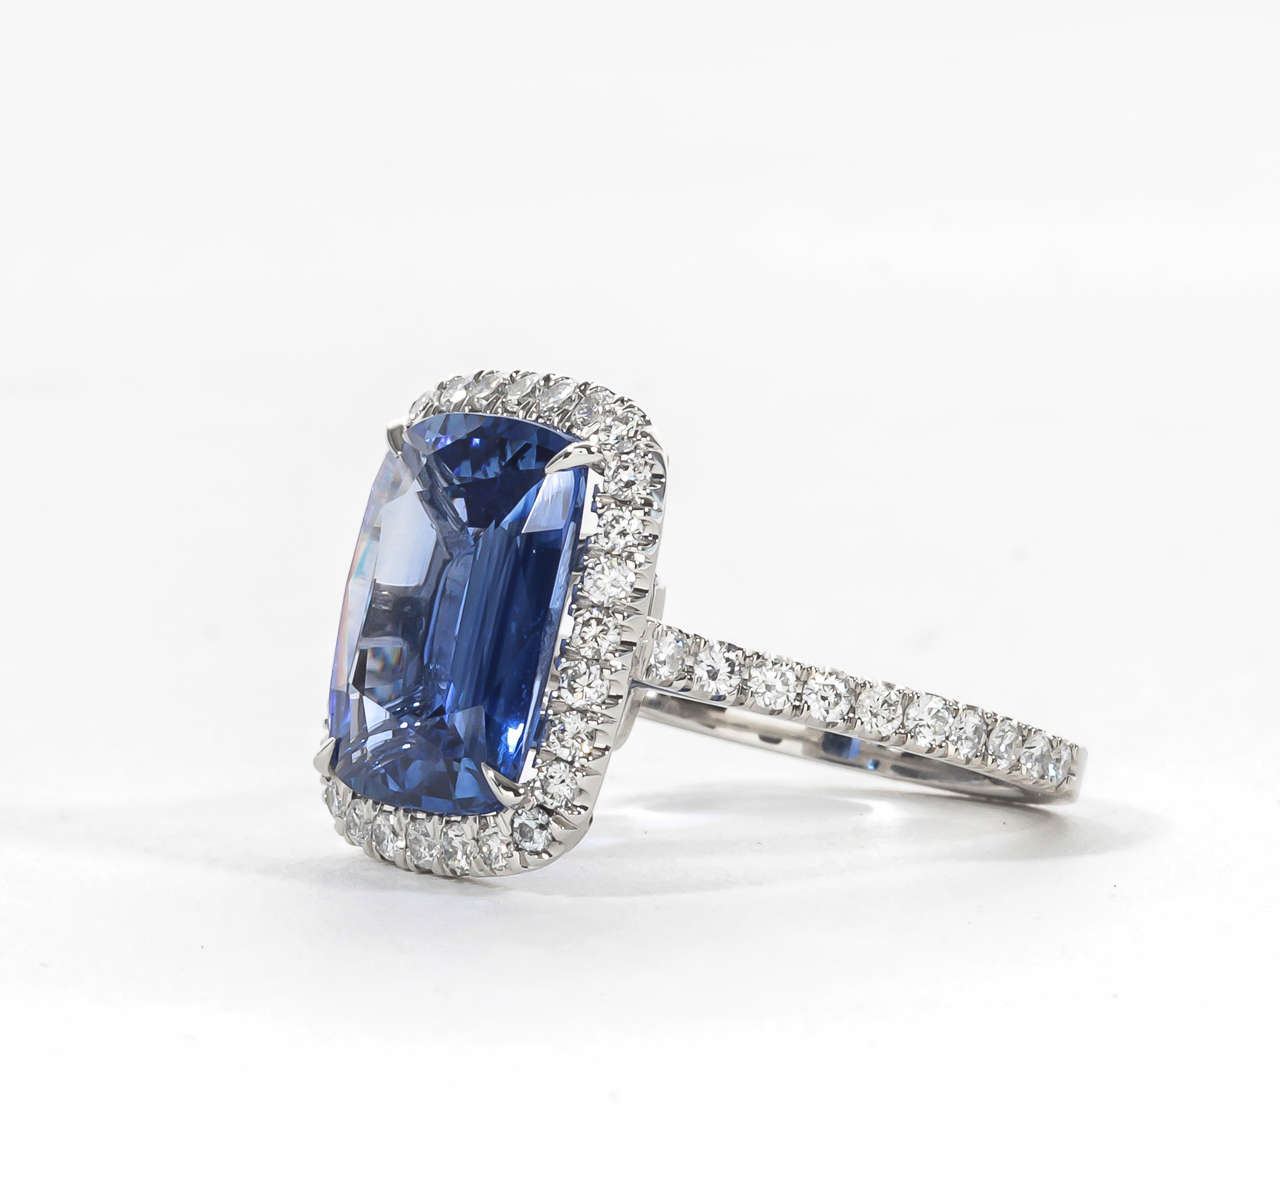 Gorgeous Cushion Cut blue sapphire set in a classic handmade halo mounting.

6.40 carat blue sapphire -- looks like a 10 carat!
1.00 carats of diamonds
Platinum

A beautiful center sapphire set in a wearable design.